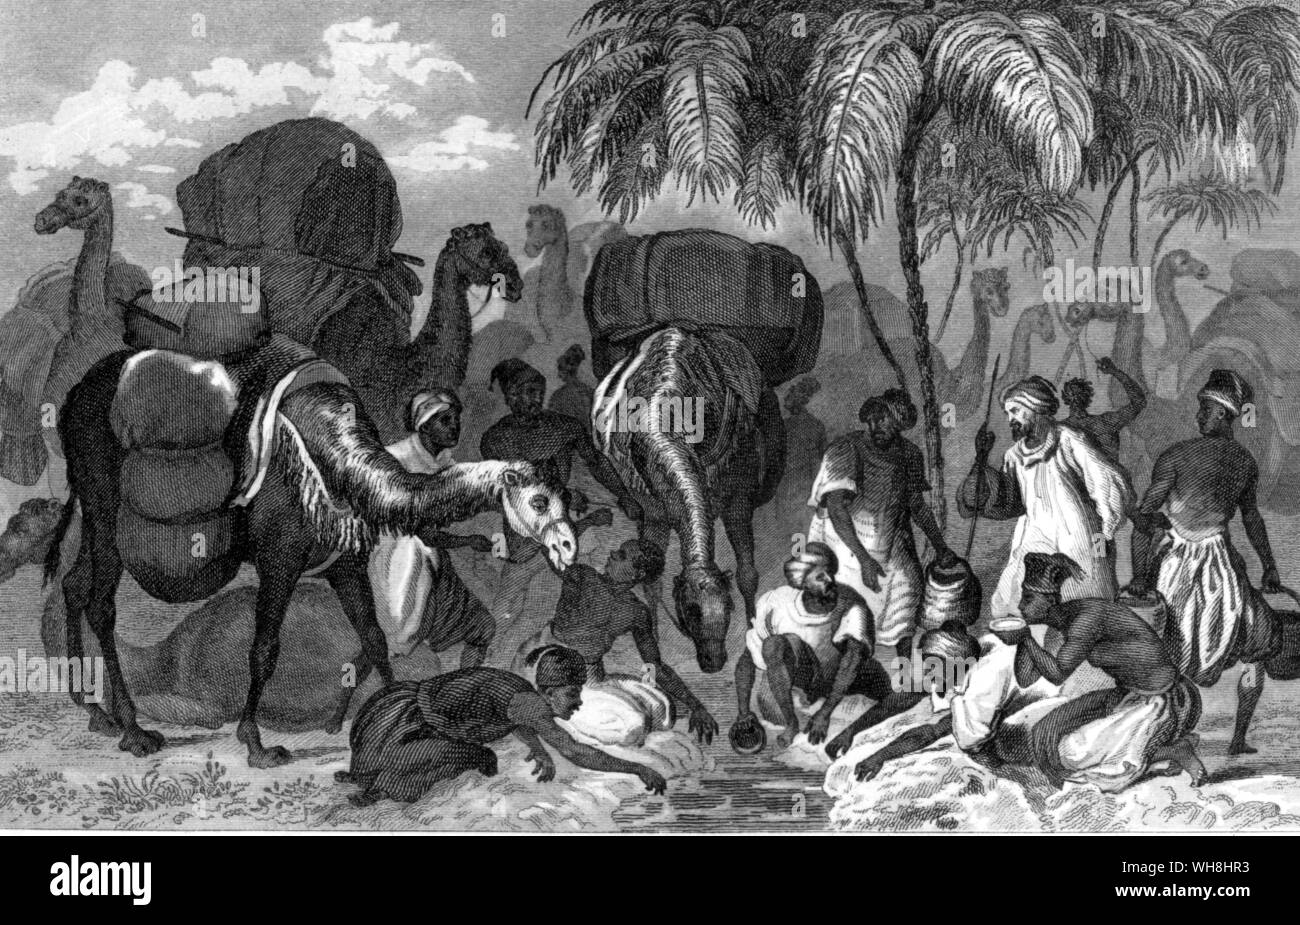 Rene Caillie's caravan at the well of Telic. René Caillié (1799-1838) was a French explorer, and the first European to return alive from the town of Timbuktu. The disguised Caillie is probably the figure standing with a staff. The African Adventure - A History of Africa's Explorers by Timothy Severin page 129. Stock Photo